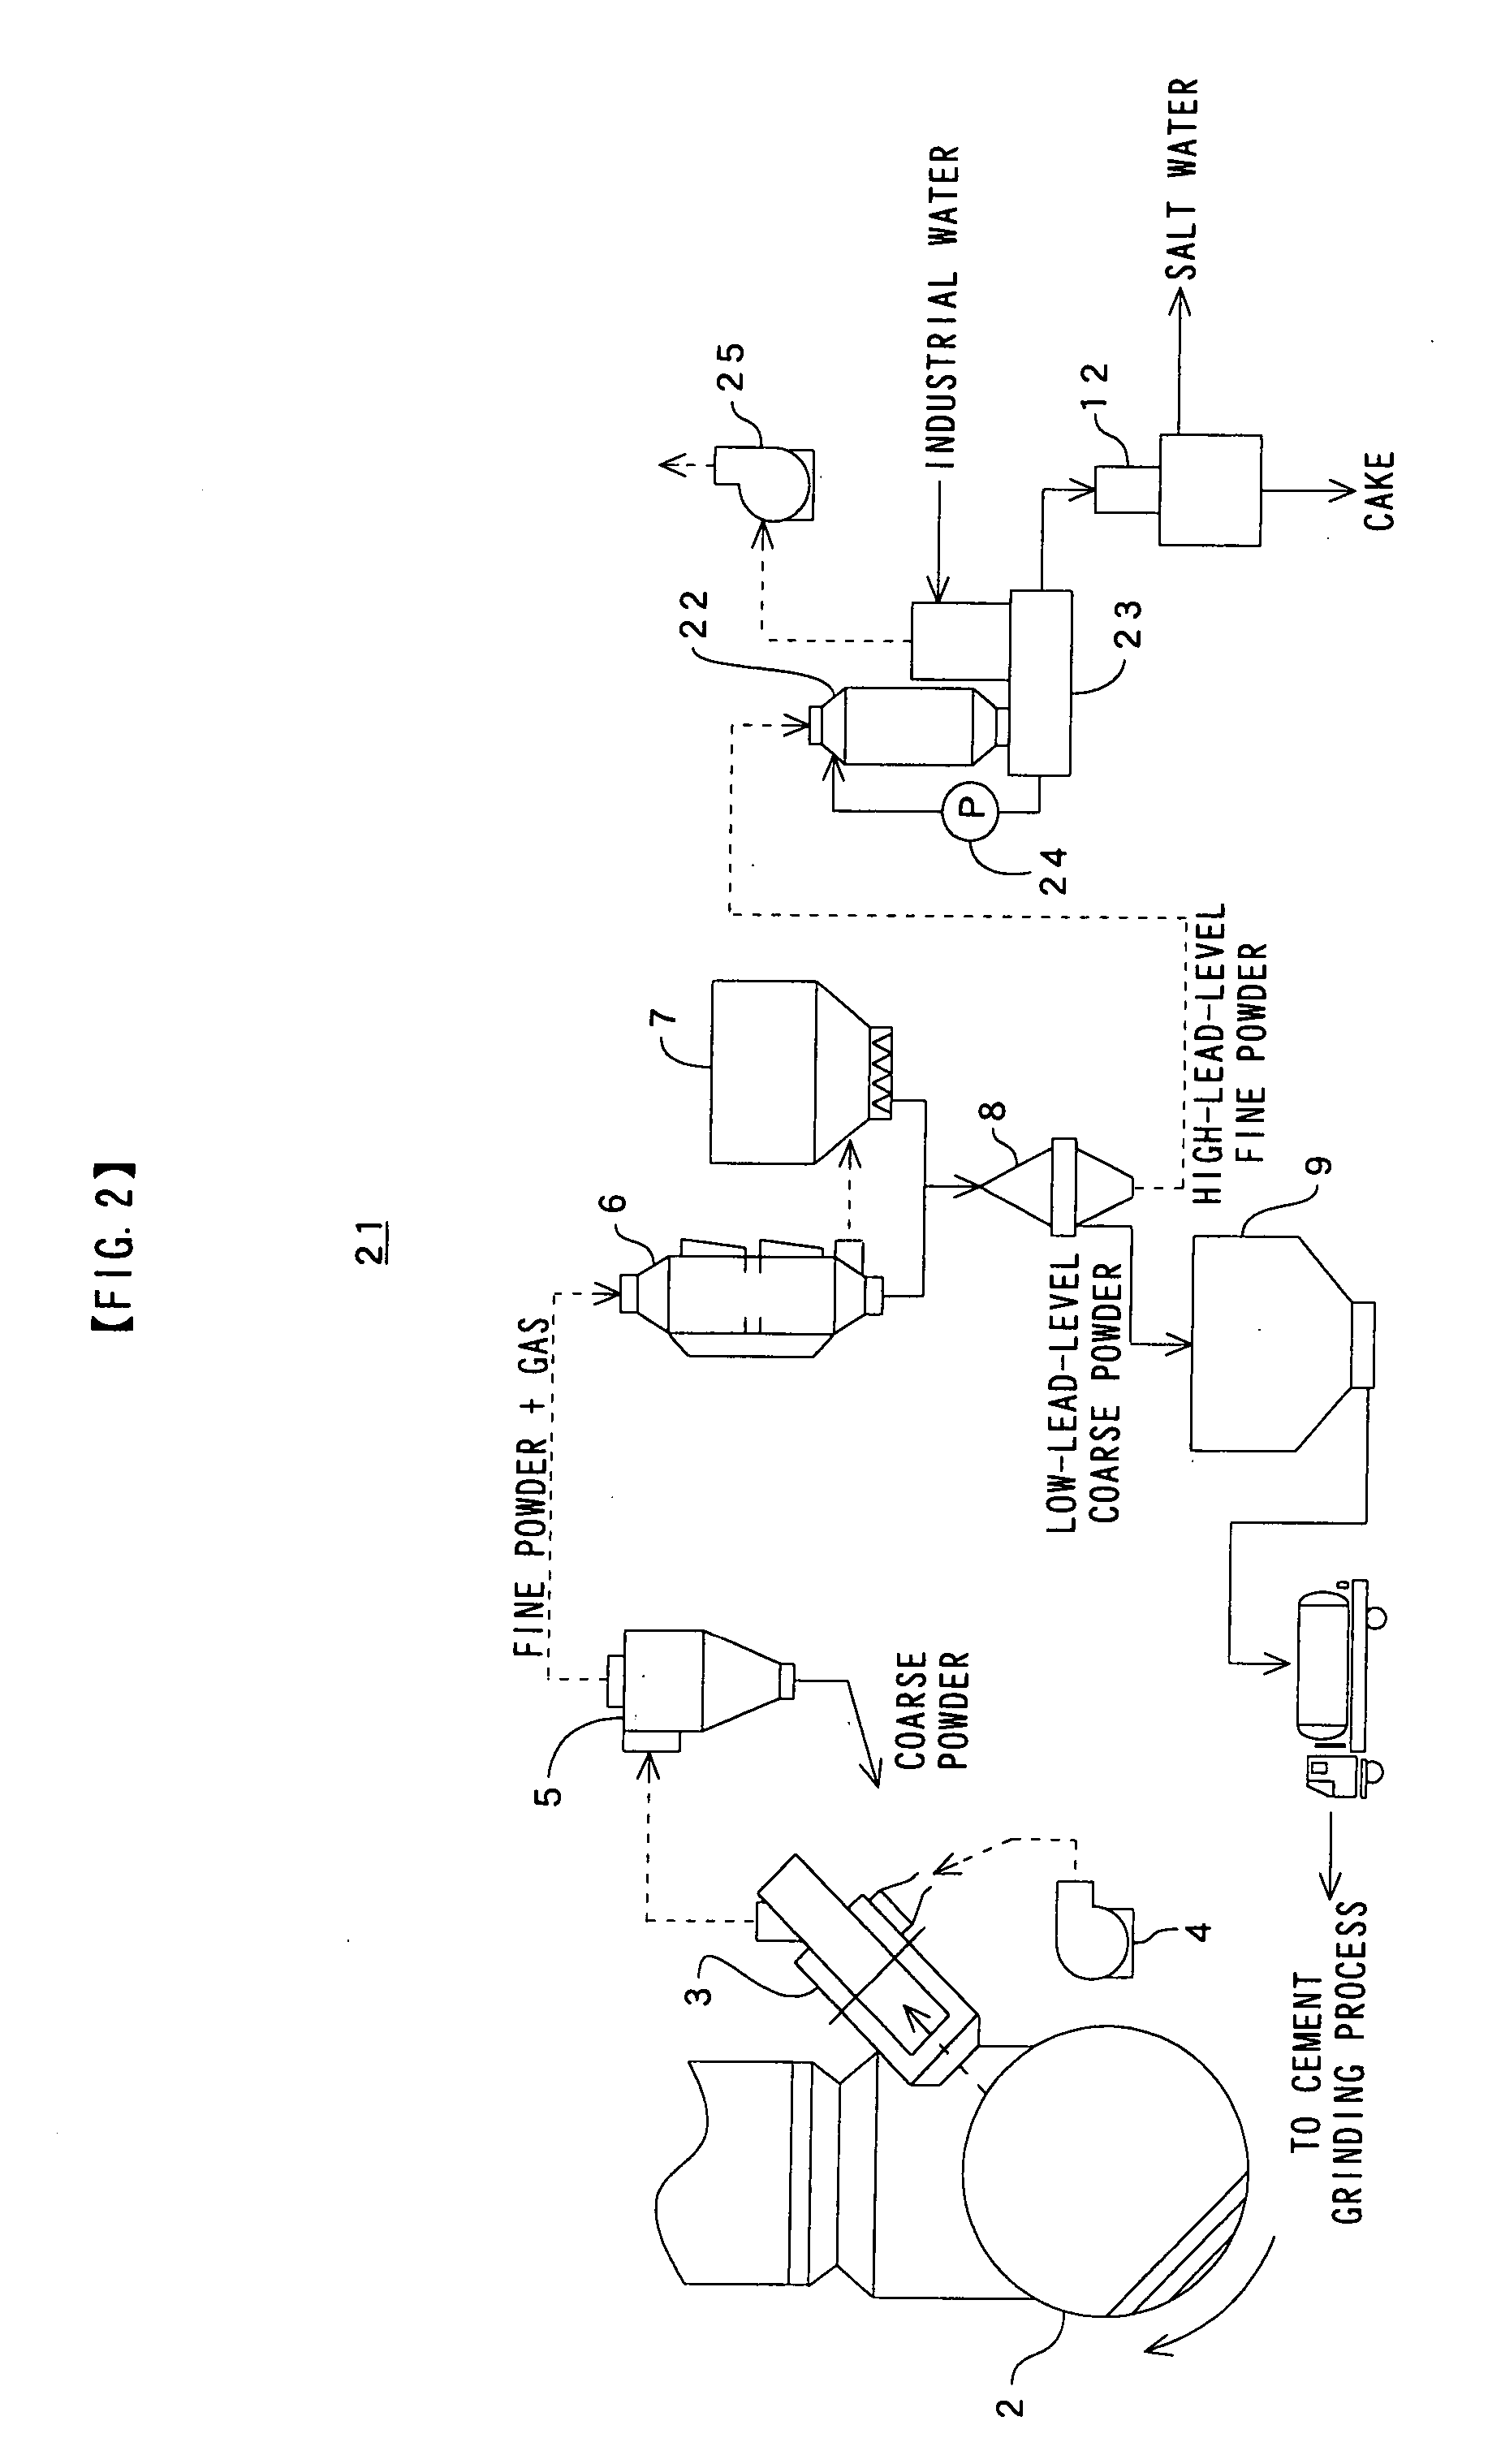 System and Method for Treating Dust Contained in Extracted Cement Kiln Combustion Gas